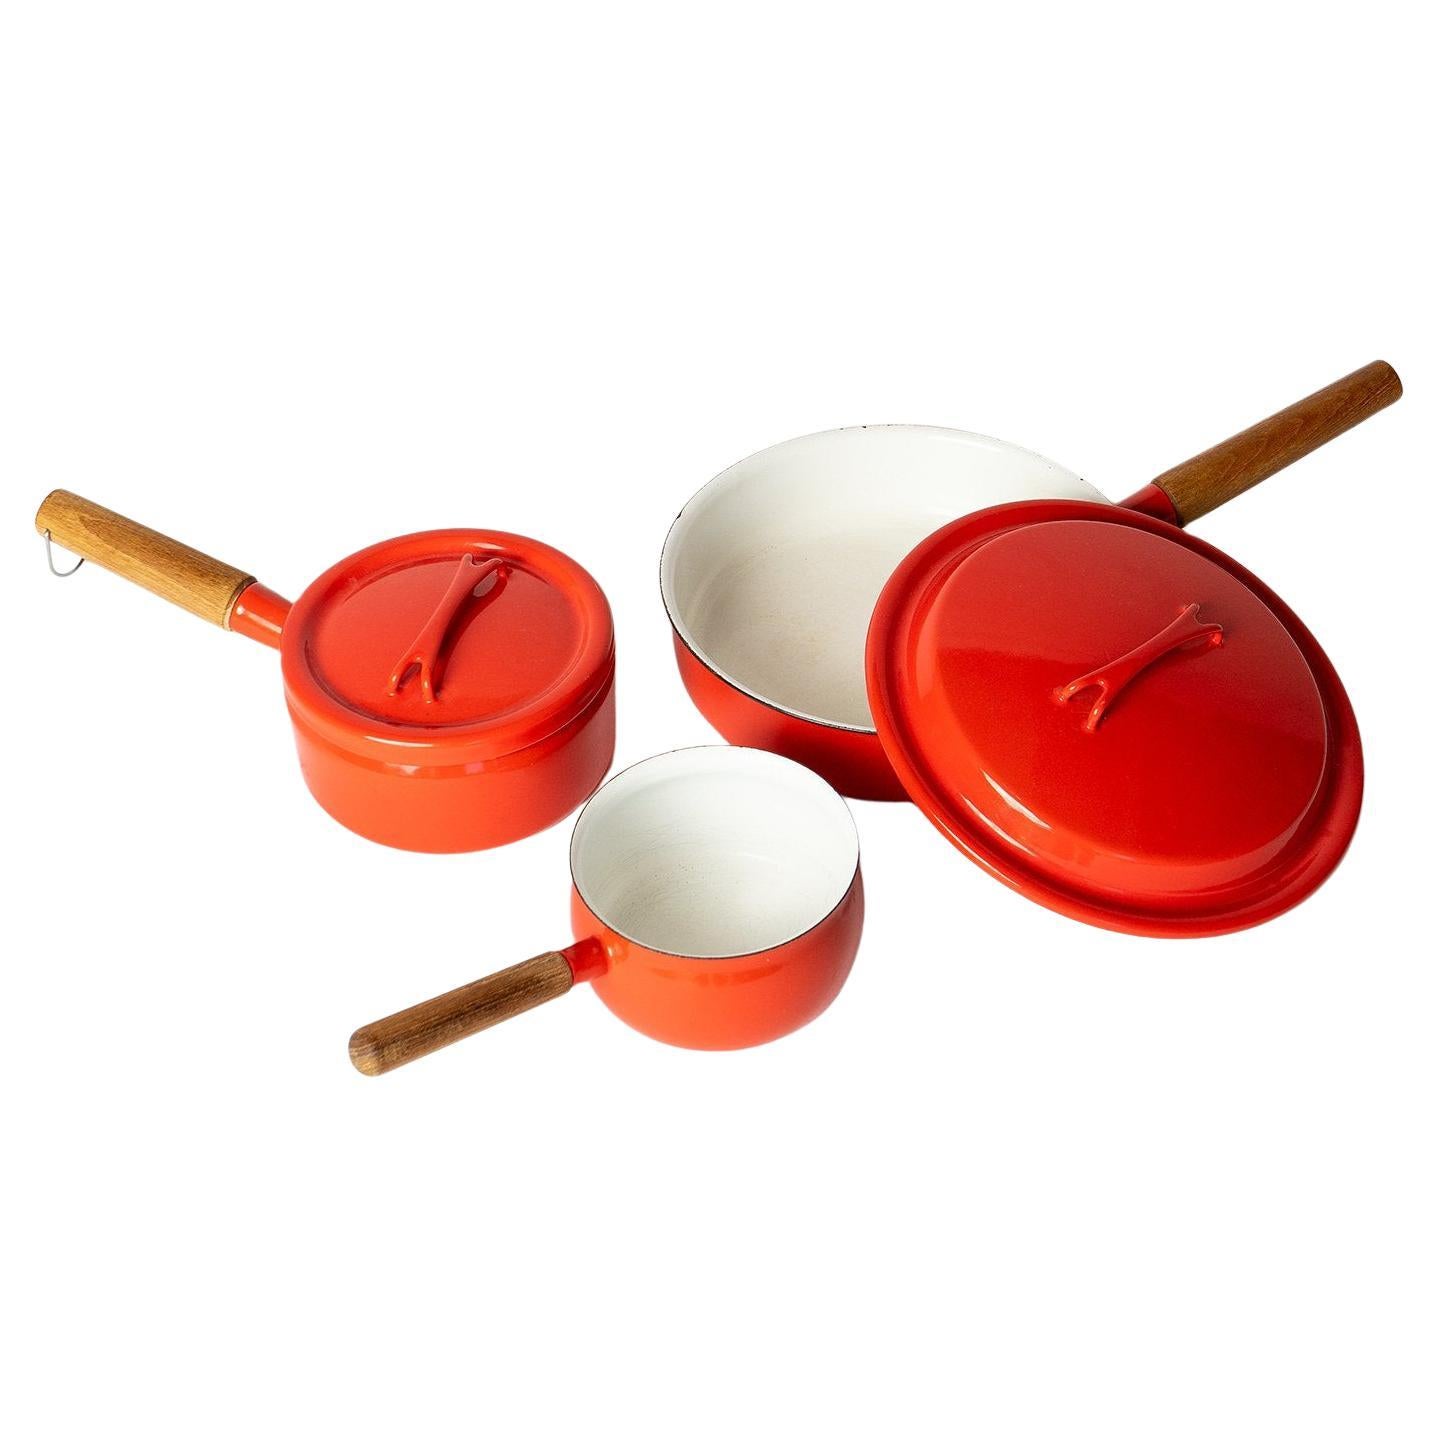 Set of Vintage Enamel Saucepans by Seppo Mallat for Finel Arabia Finland, 1960s For Sale